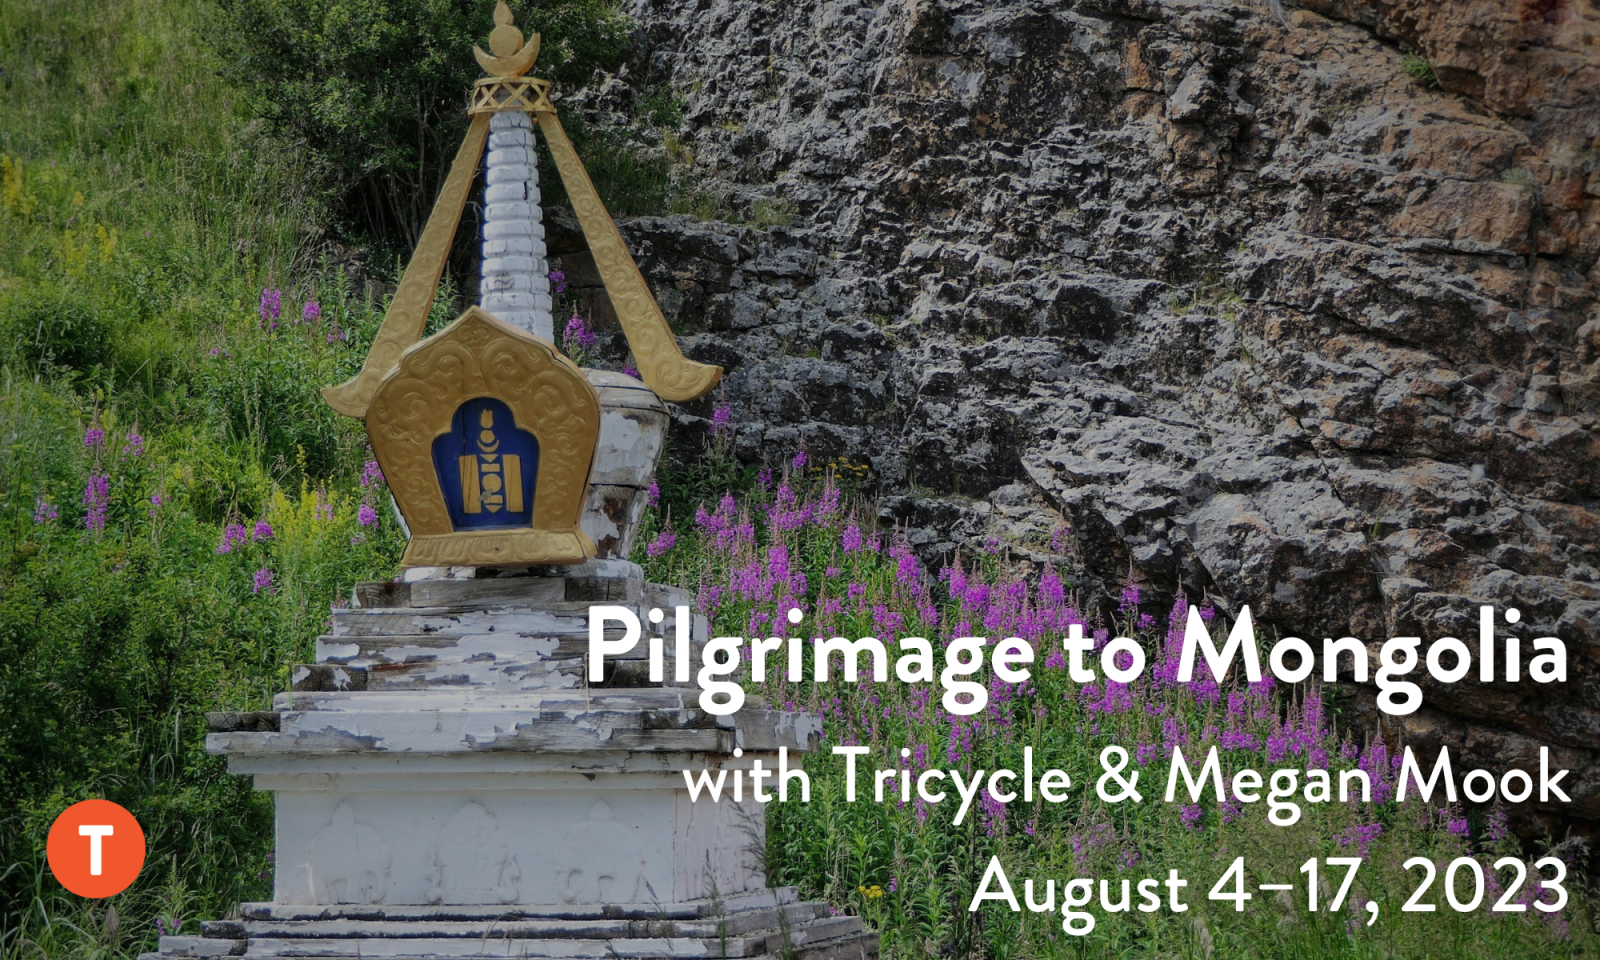 Pilgrimage to Mongolia with Tricycle and Megan Mook August 4-17, 2022